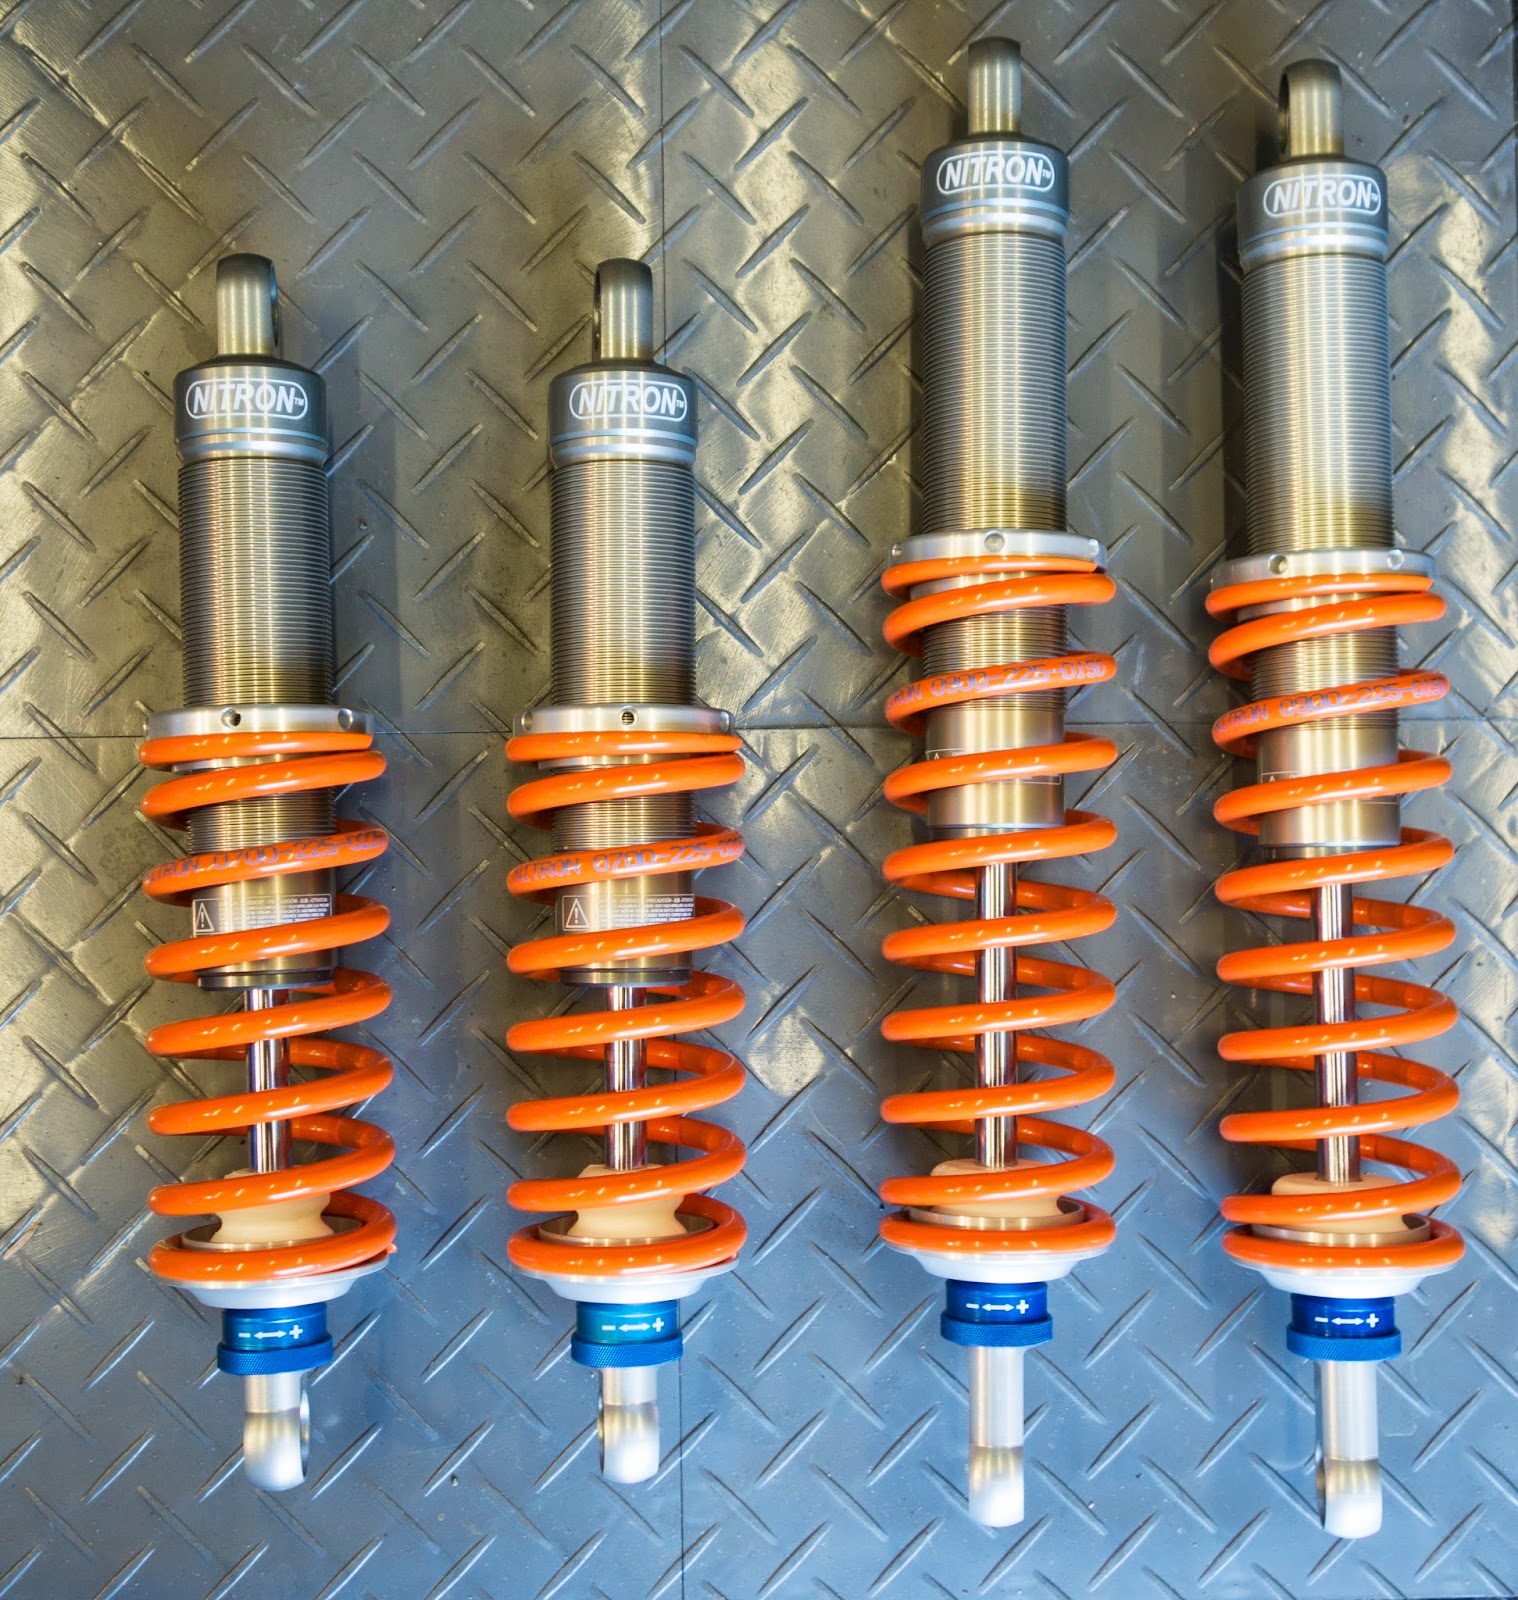 Nitron Race R1 shocks ready for fitting to my Caterham R500 Duratec